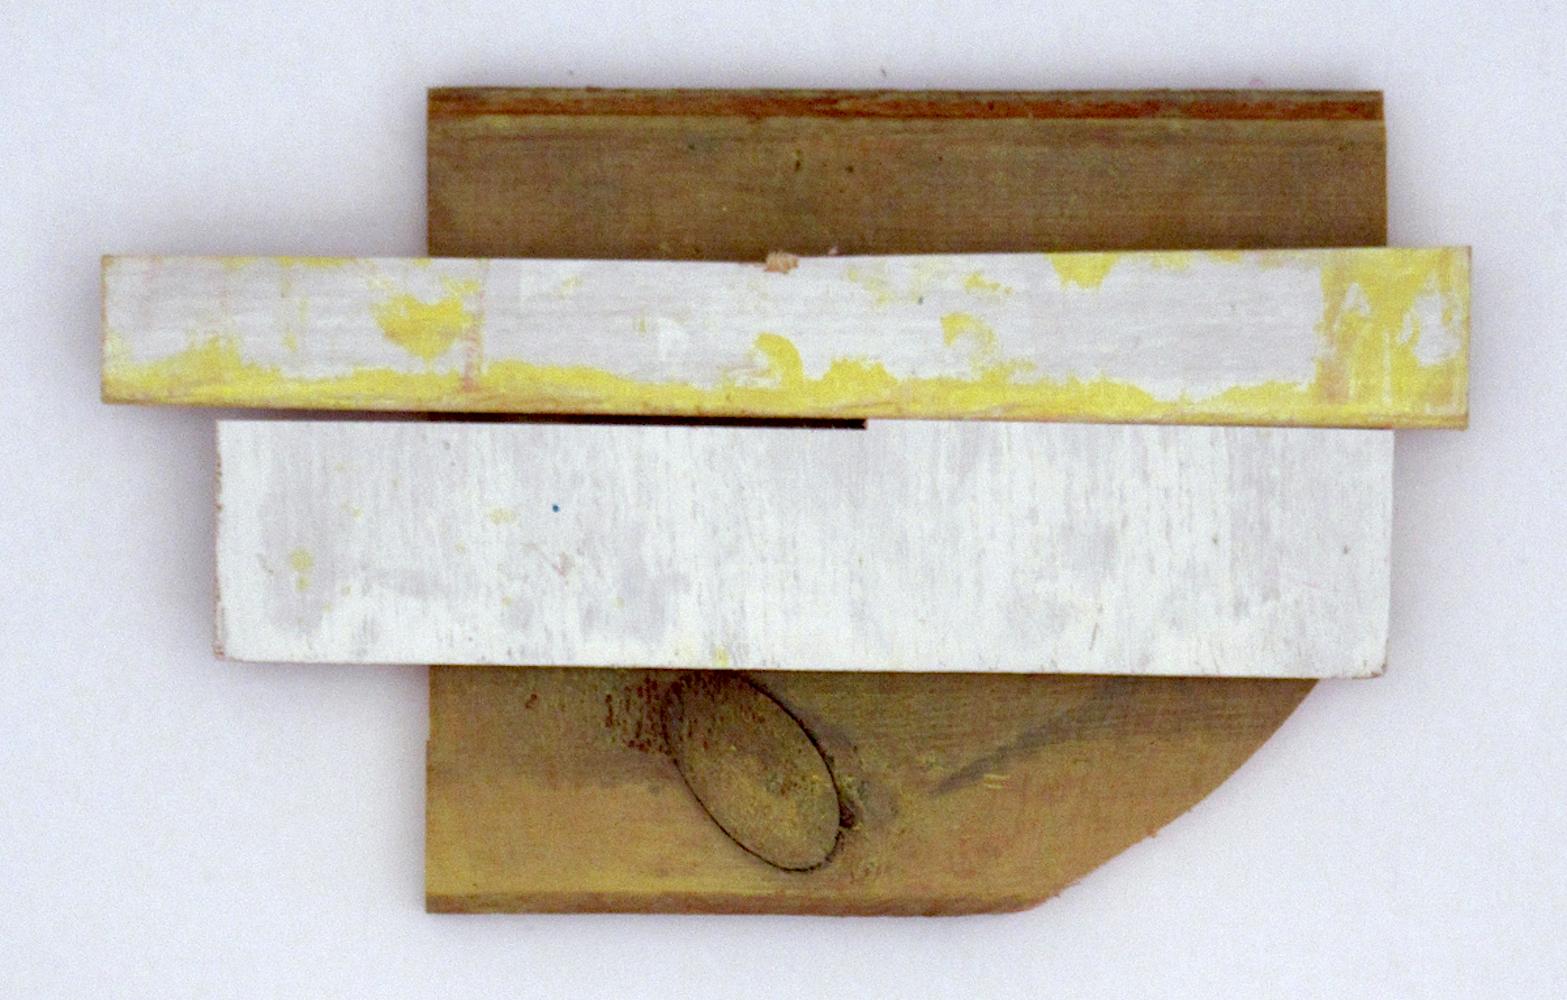 Diane Englander, White and Yellow Wood 2018, scrapwood and acrylic, 7 x 11.25 in